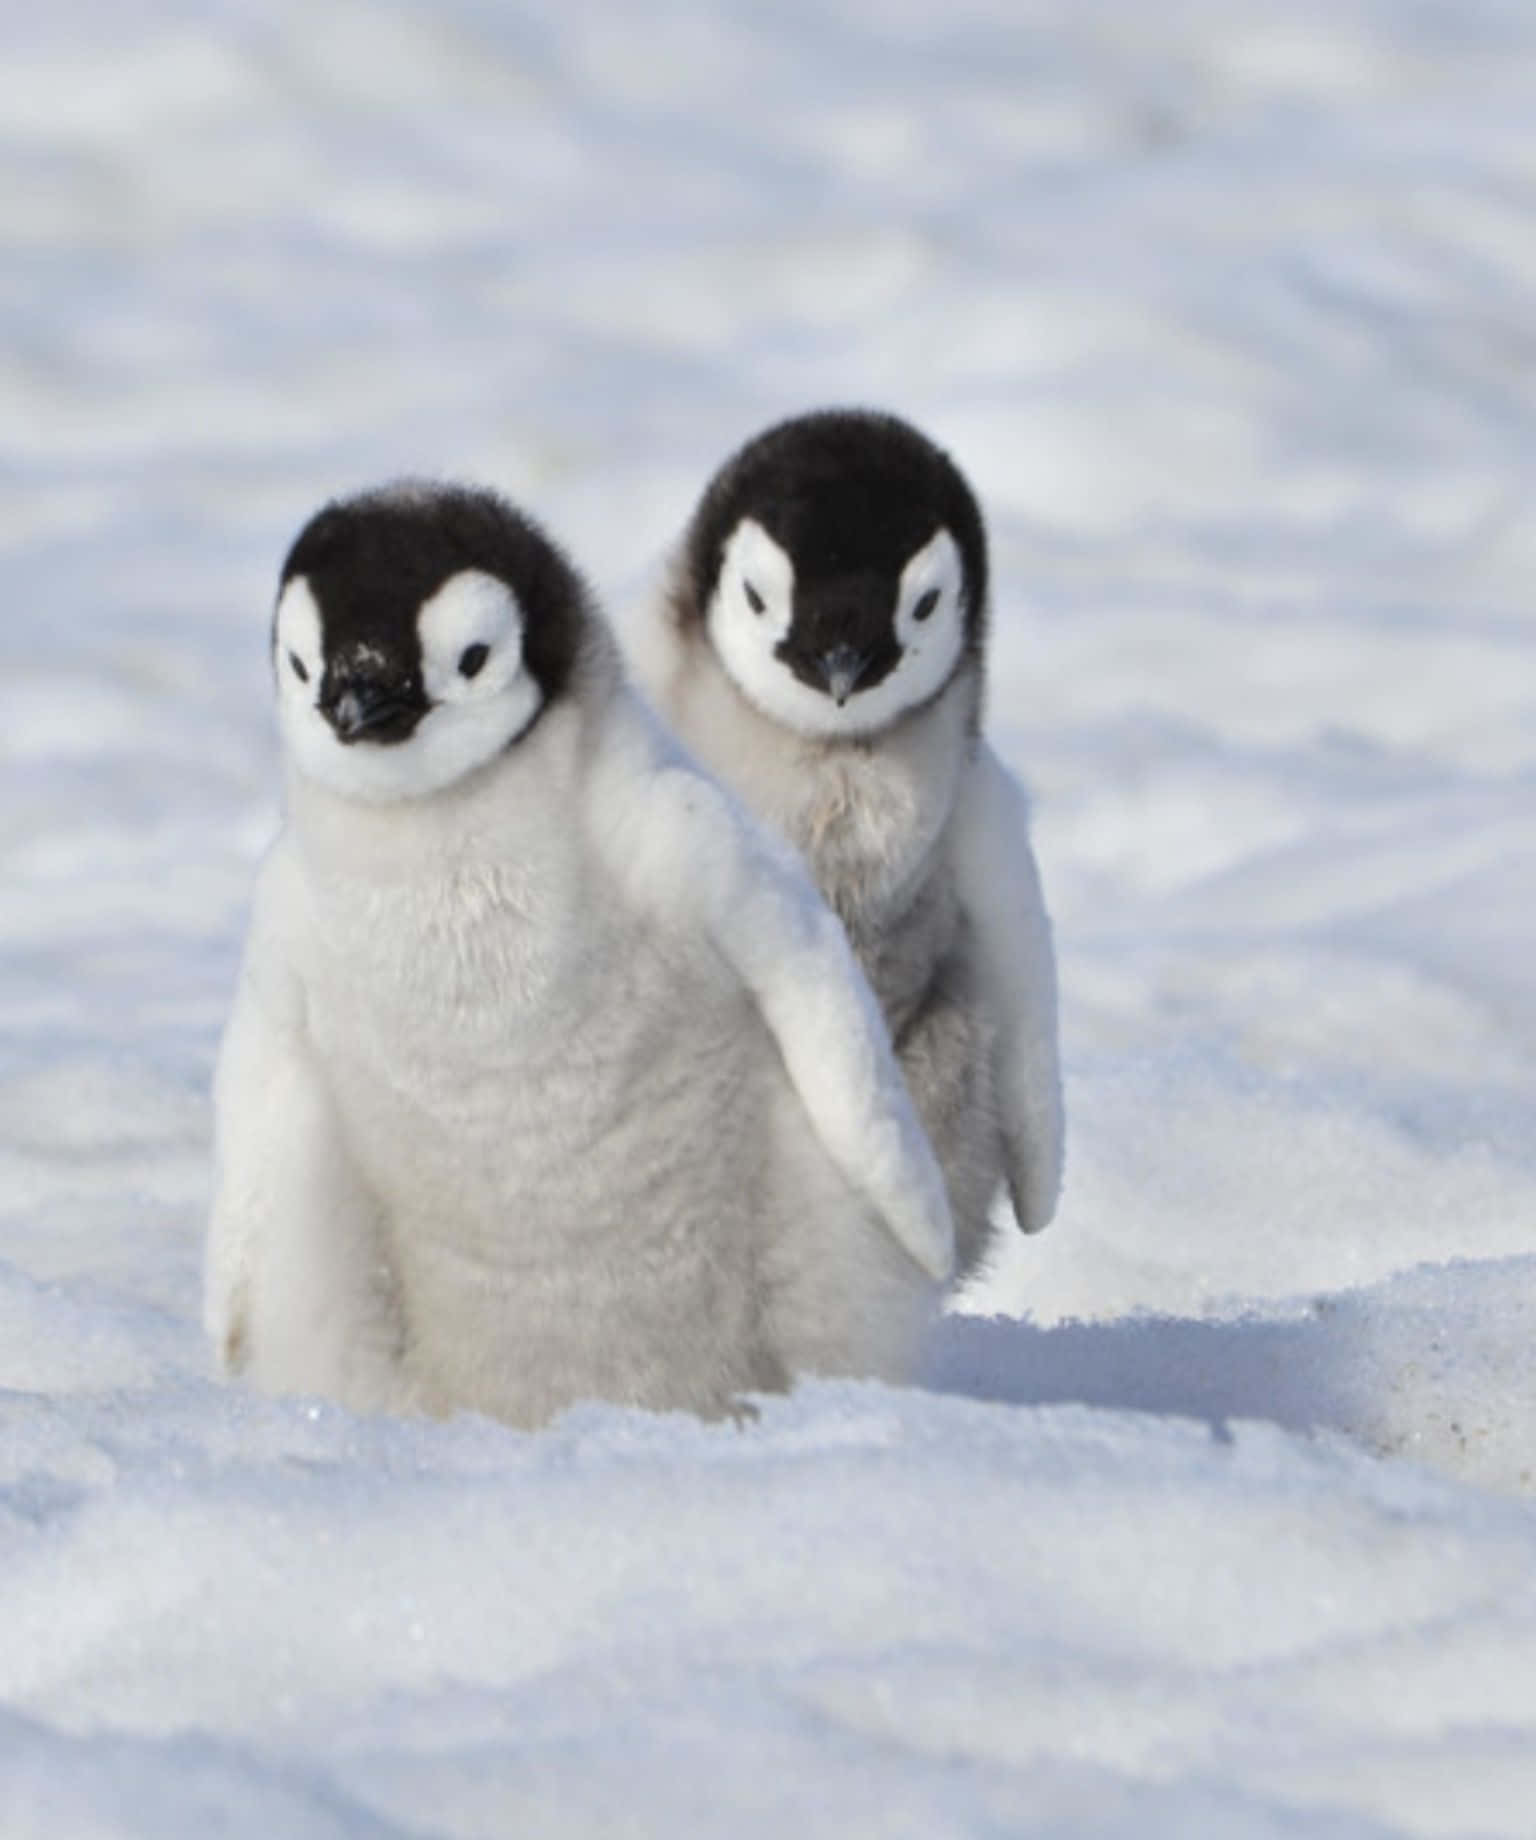 Adorable baby penguin huddling for warmth.